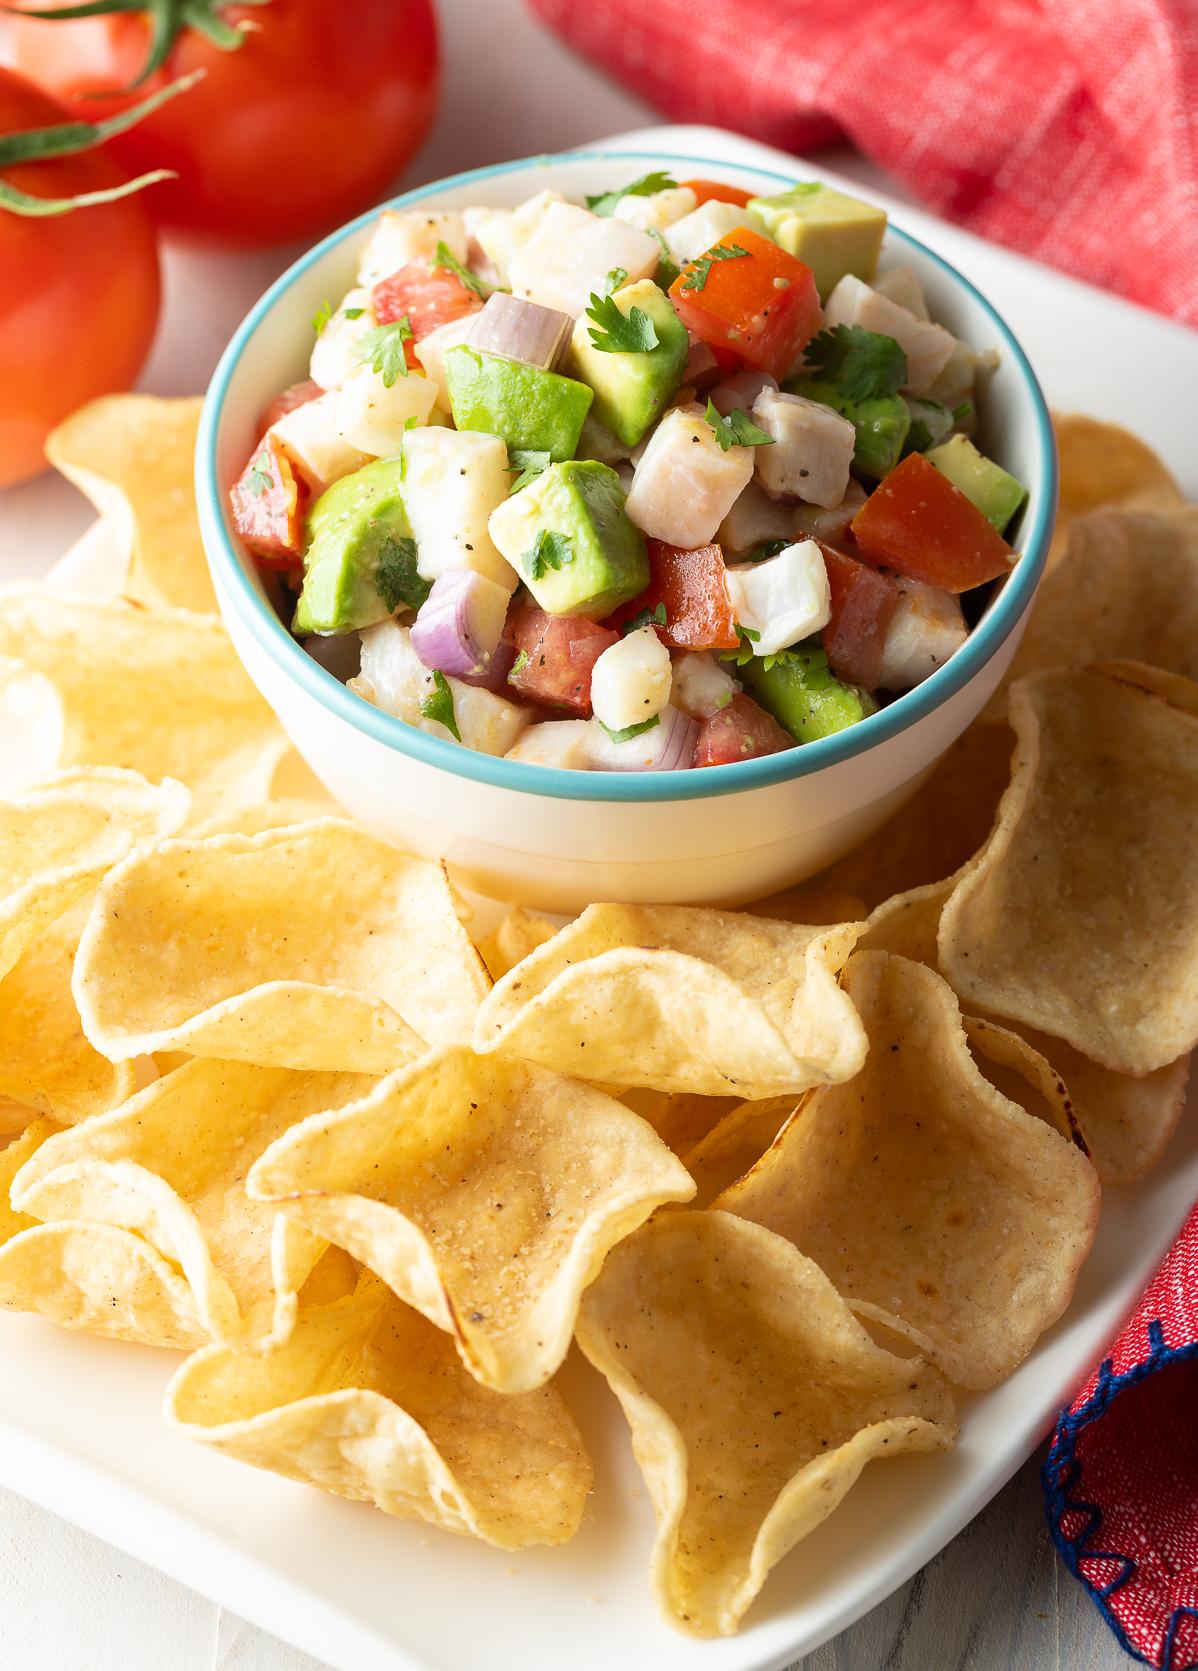  Tangy lime juice and spicy peppers add zing to Ceviche De Corvina.